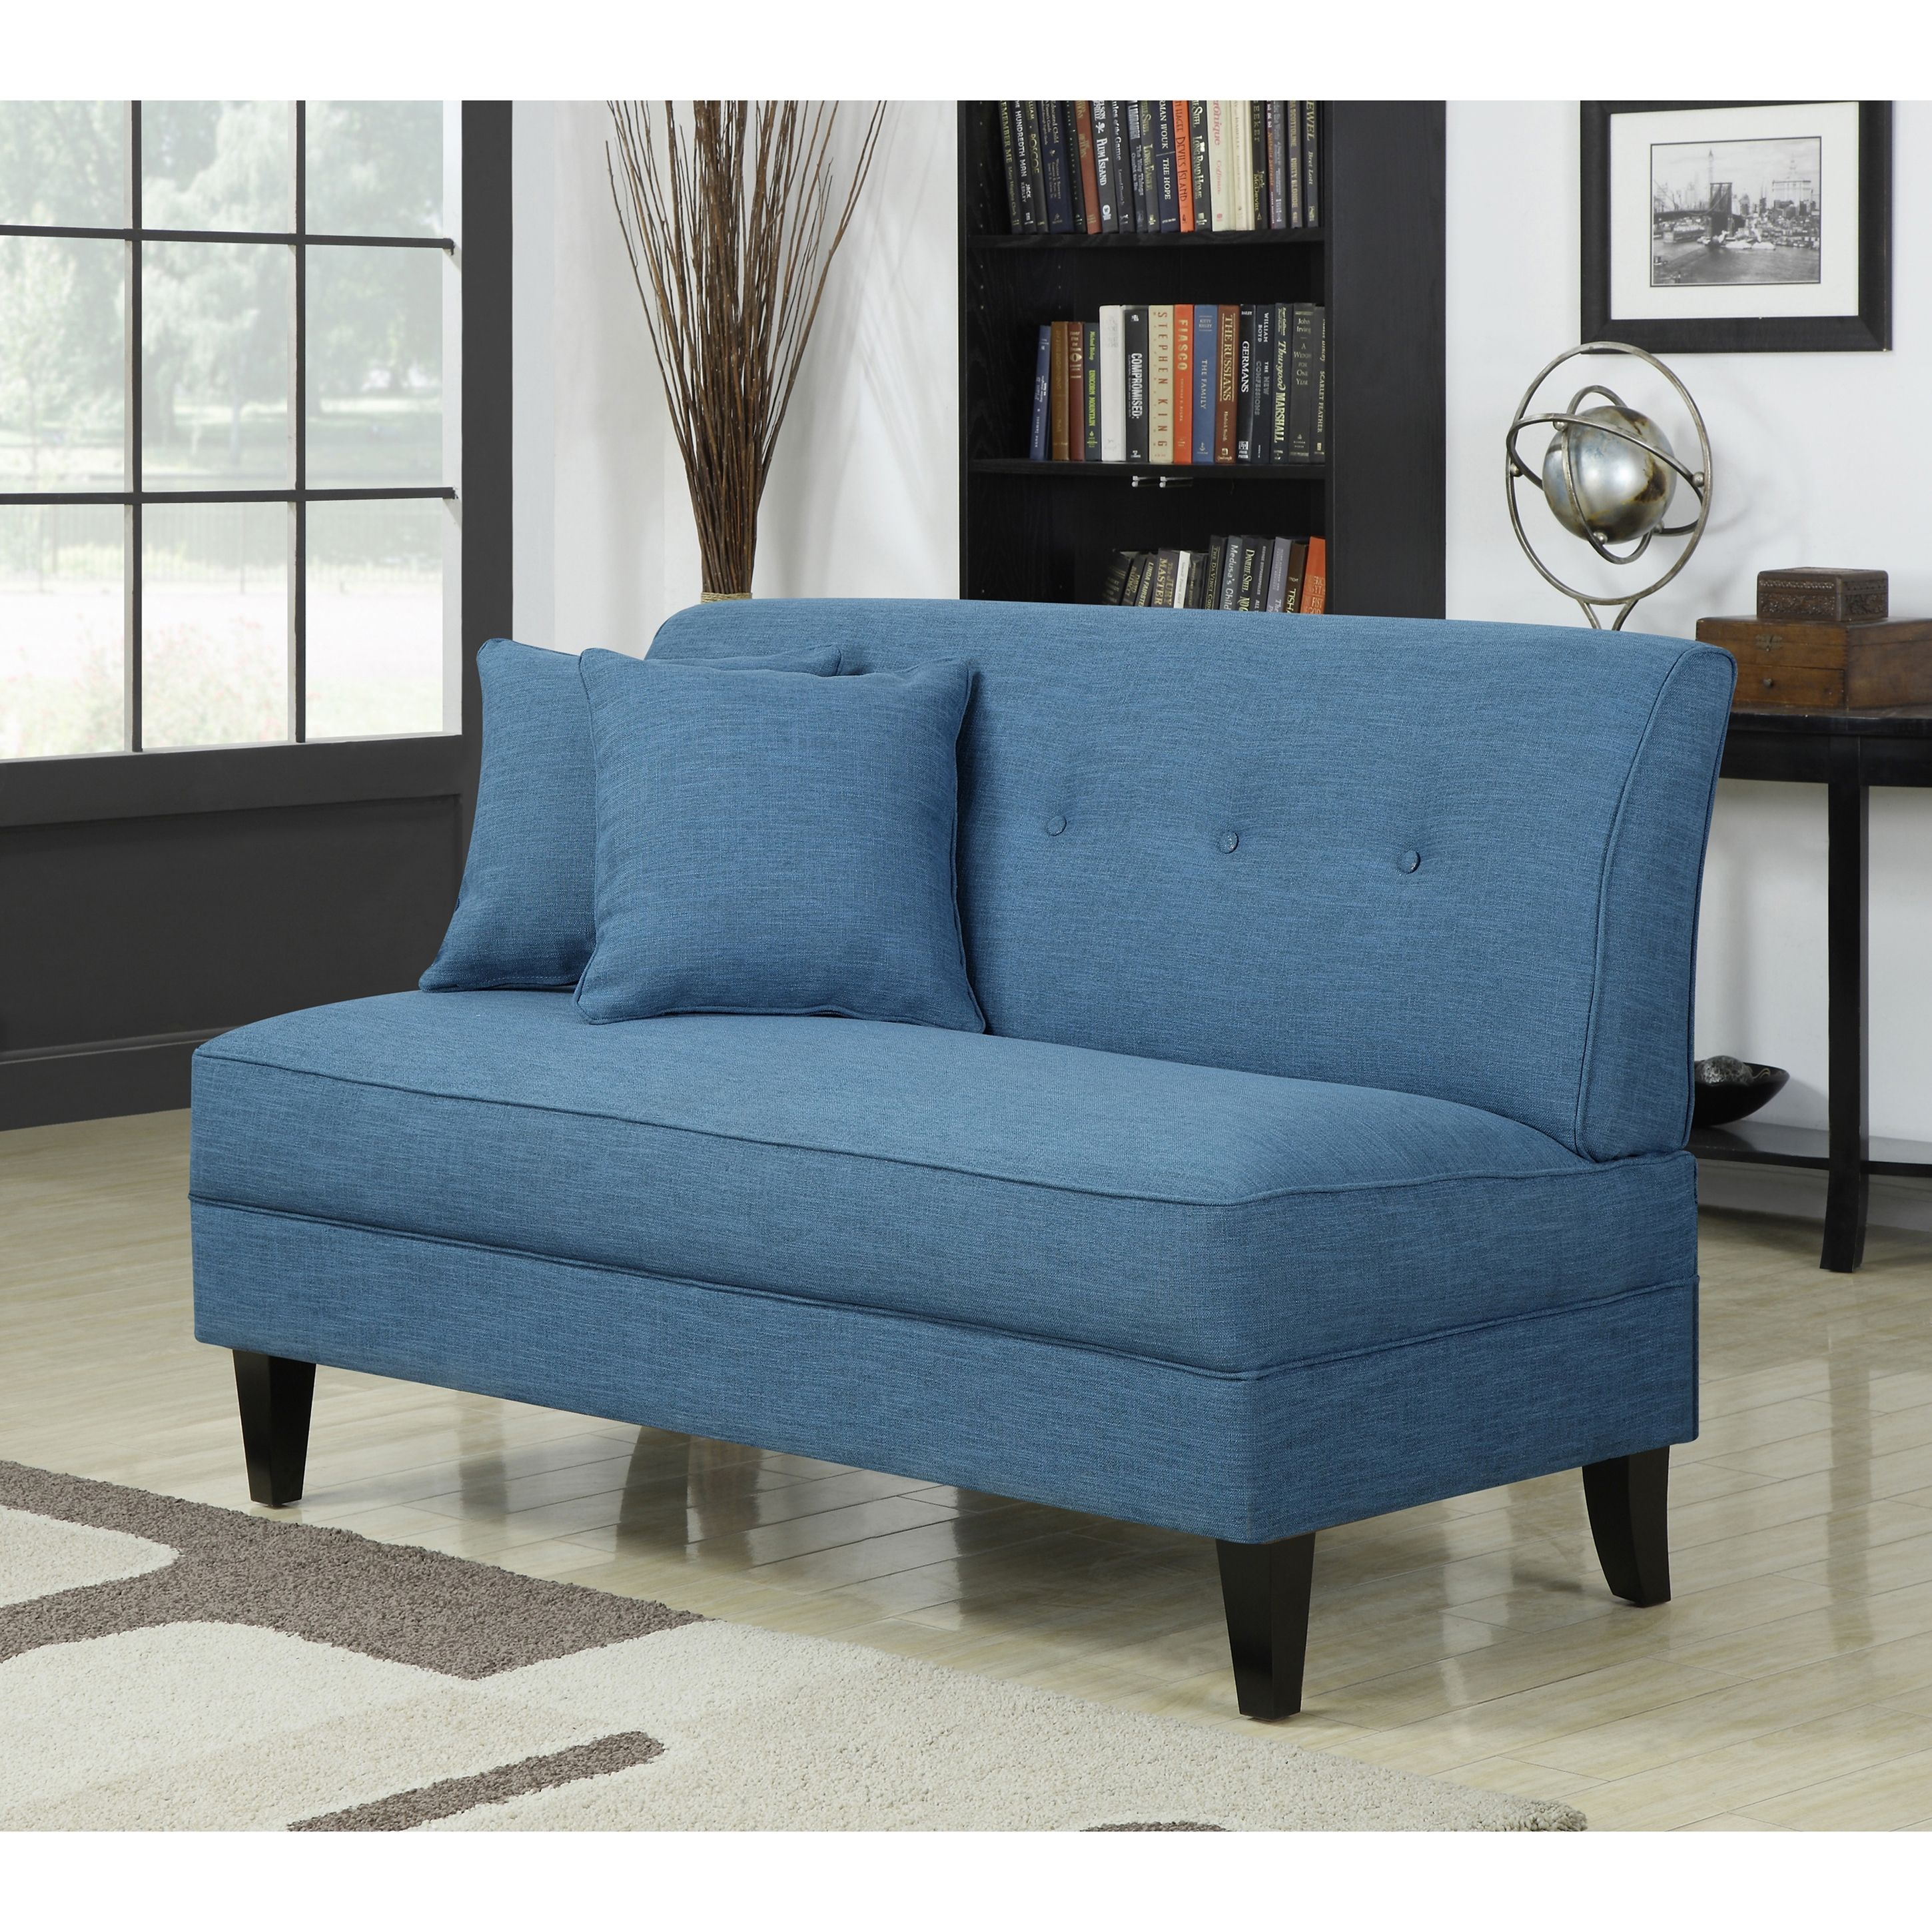 Cheap Sofas And Loveseats (View 15 of 20)